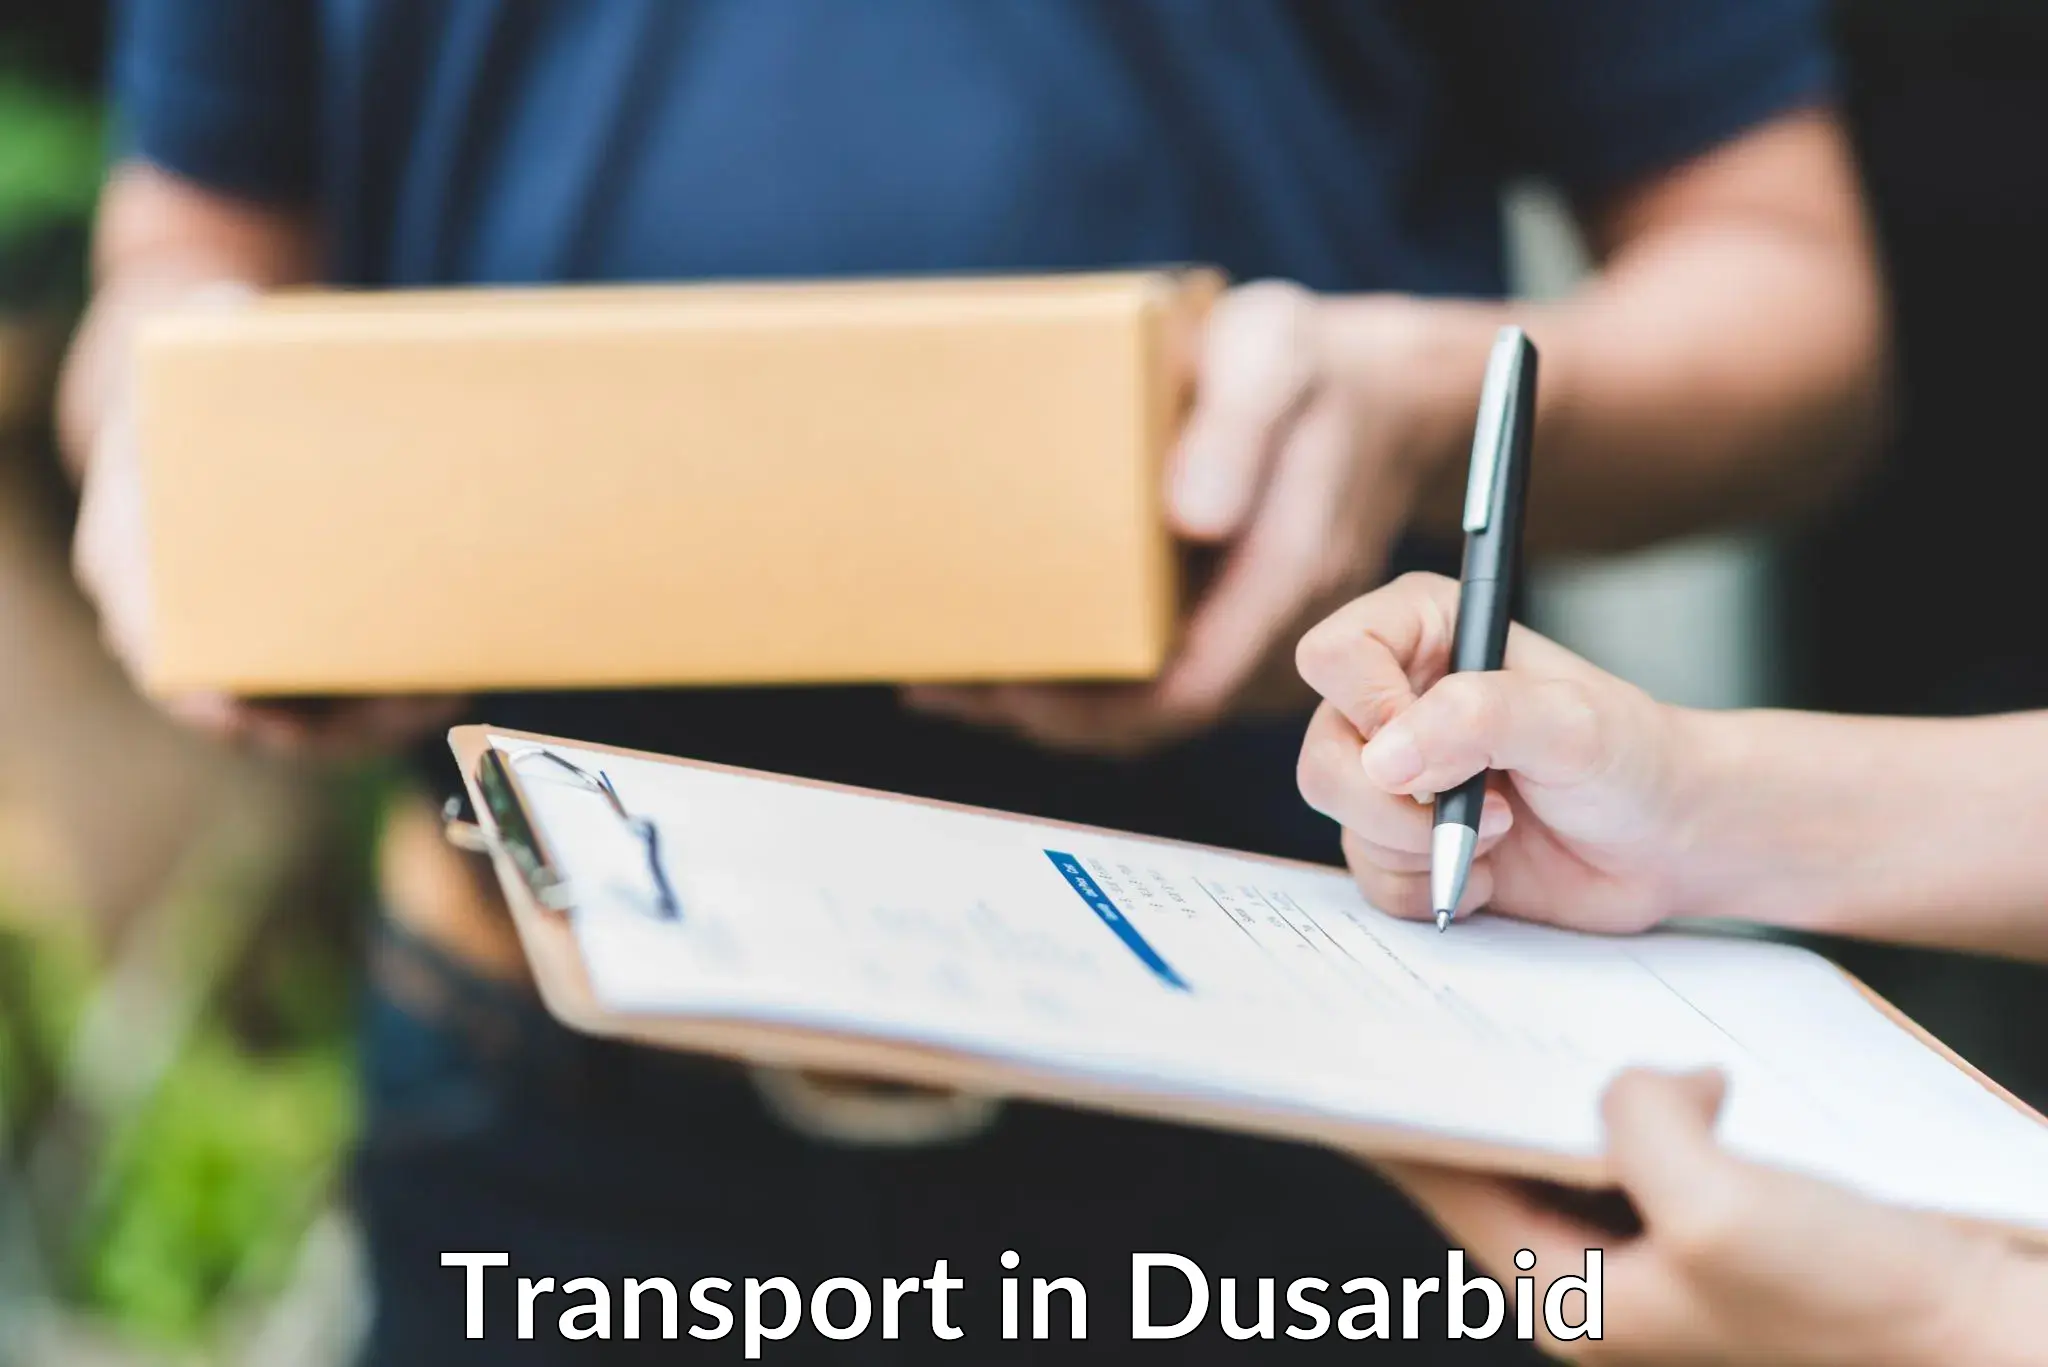 Domestic goods transportation services in Dusarbid